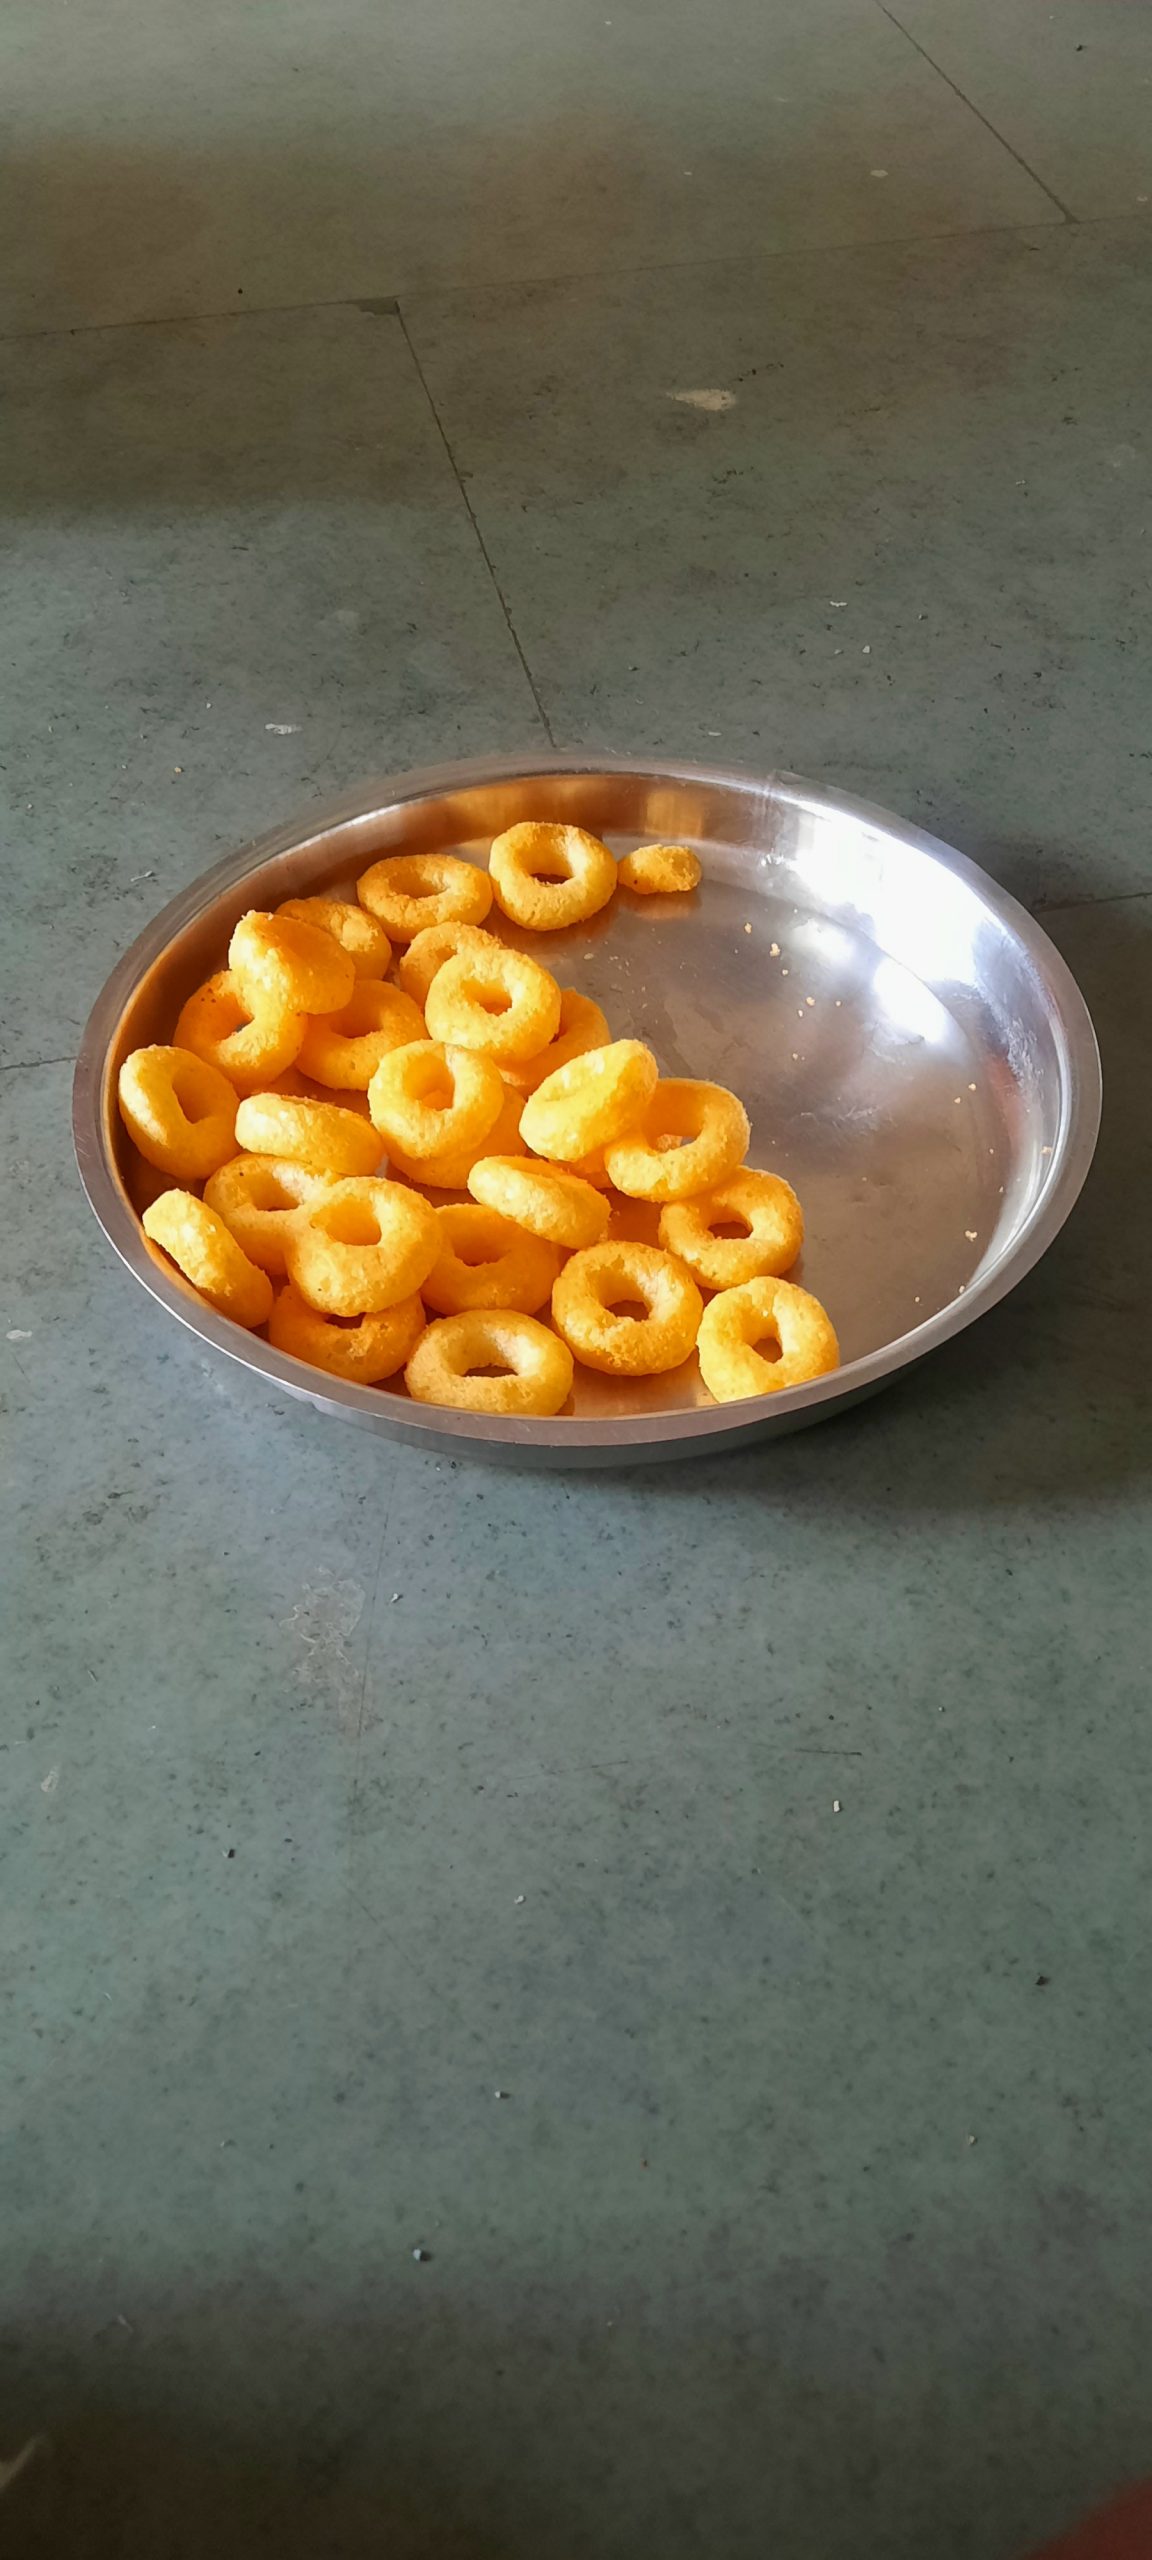 Snacks in a plate